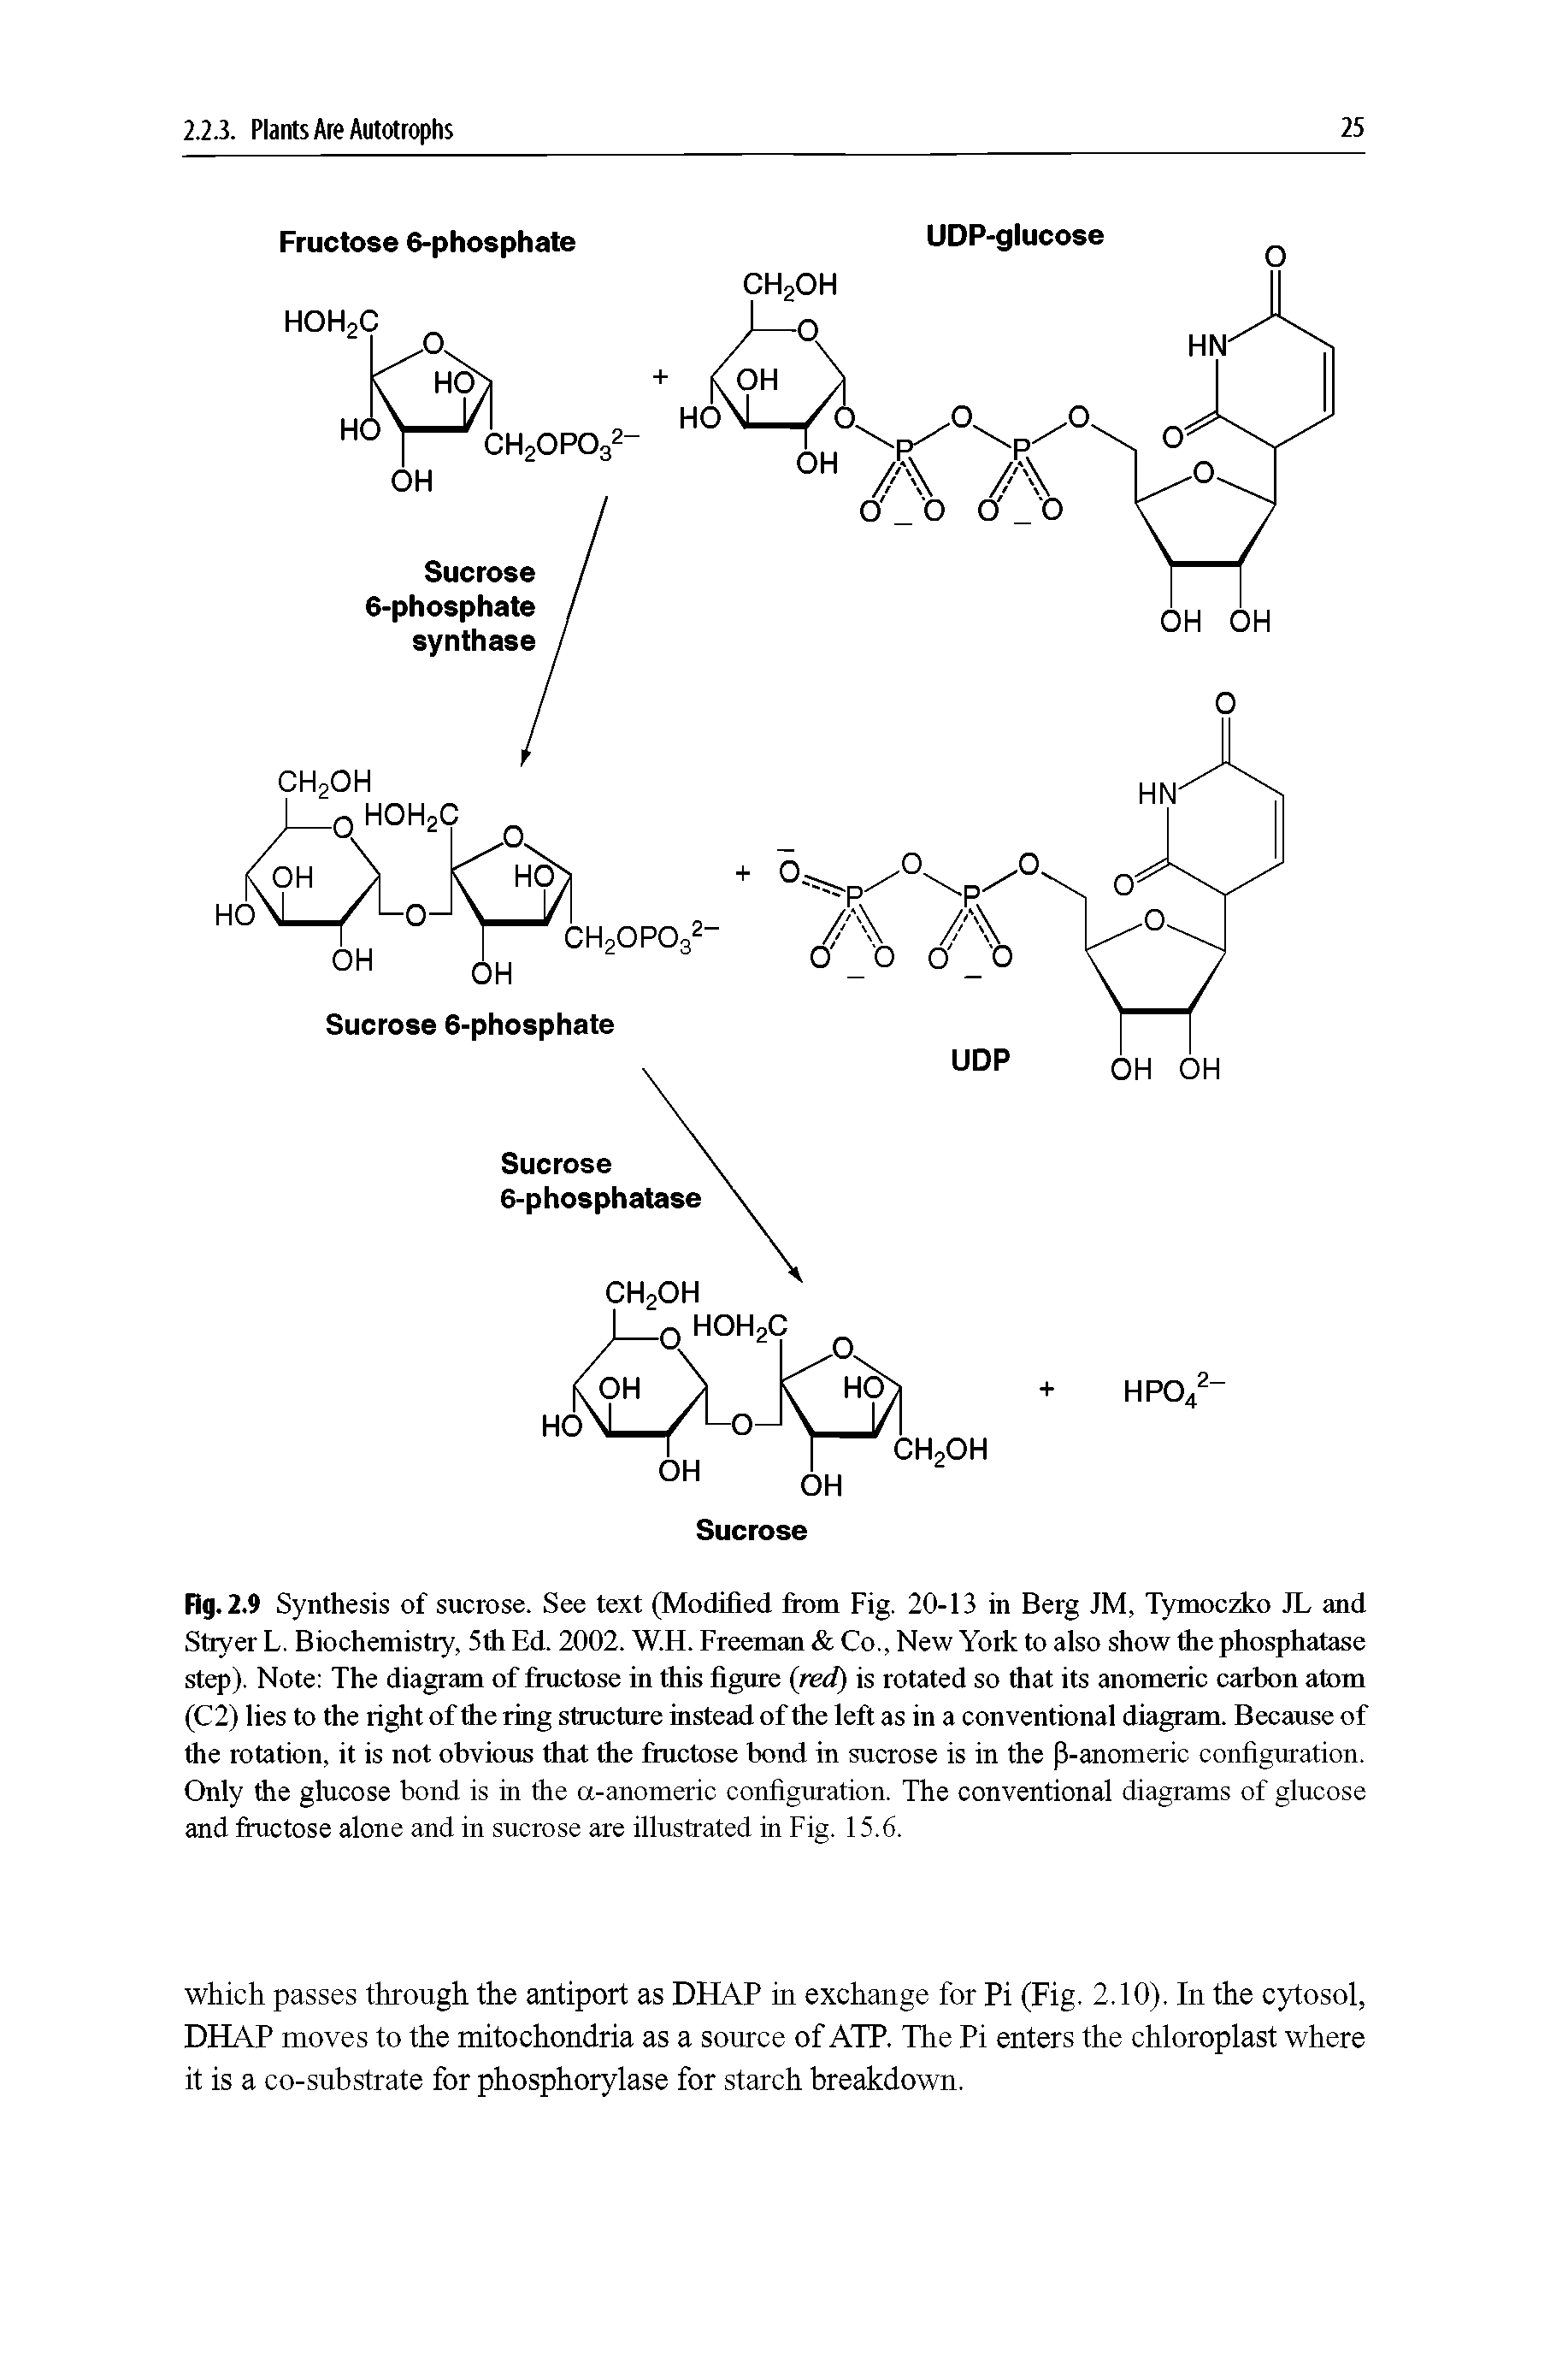 Fig. 2.9 Synthesis of sucrose. See text (Modified from Fig. 20-13 in Berg JM, Tymoczko JL and Stiver L. Biochemistry, 5th Ed. 2002. W.H. Freeman Co., New York to also show the phosphatase step). Note The diagram of fructose in this figure (red) is rotated so that its anomeric carbon atom (C2) lies to the right of the ring structure instead of the left as in a conventional diagram. Because of the rotation, it is not obvious that the fructose bond in sucrose is in the (3-anomeric configuration. Only the glucose bond is in the a-anomeric configuration. The conventional diagrams of glucose and fructose alone and in sucrose are illustrated in Fig. 15.6.